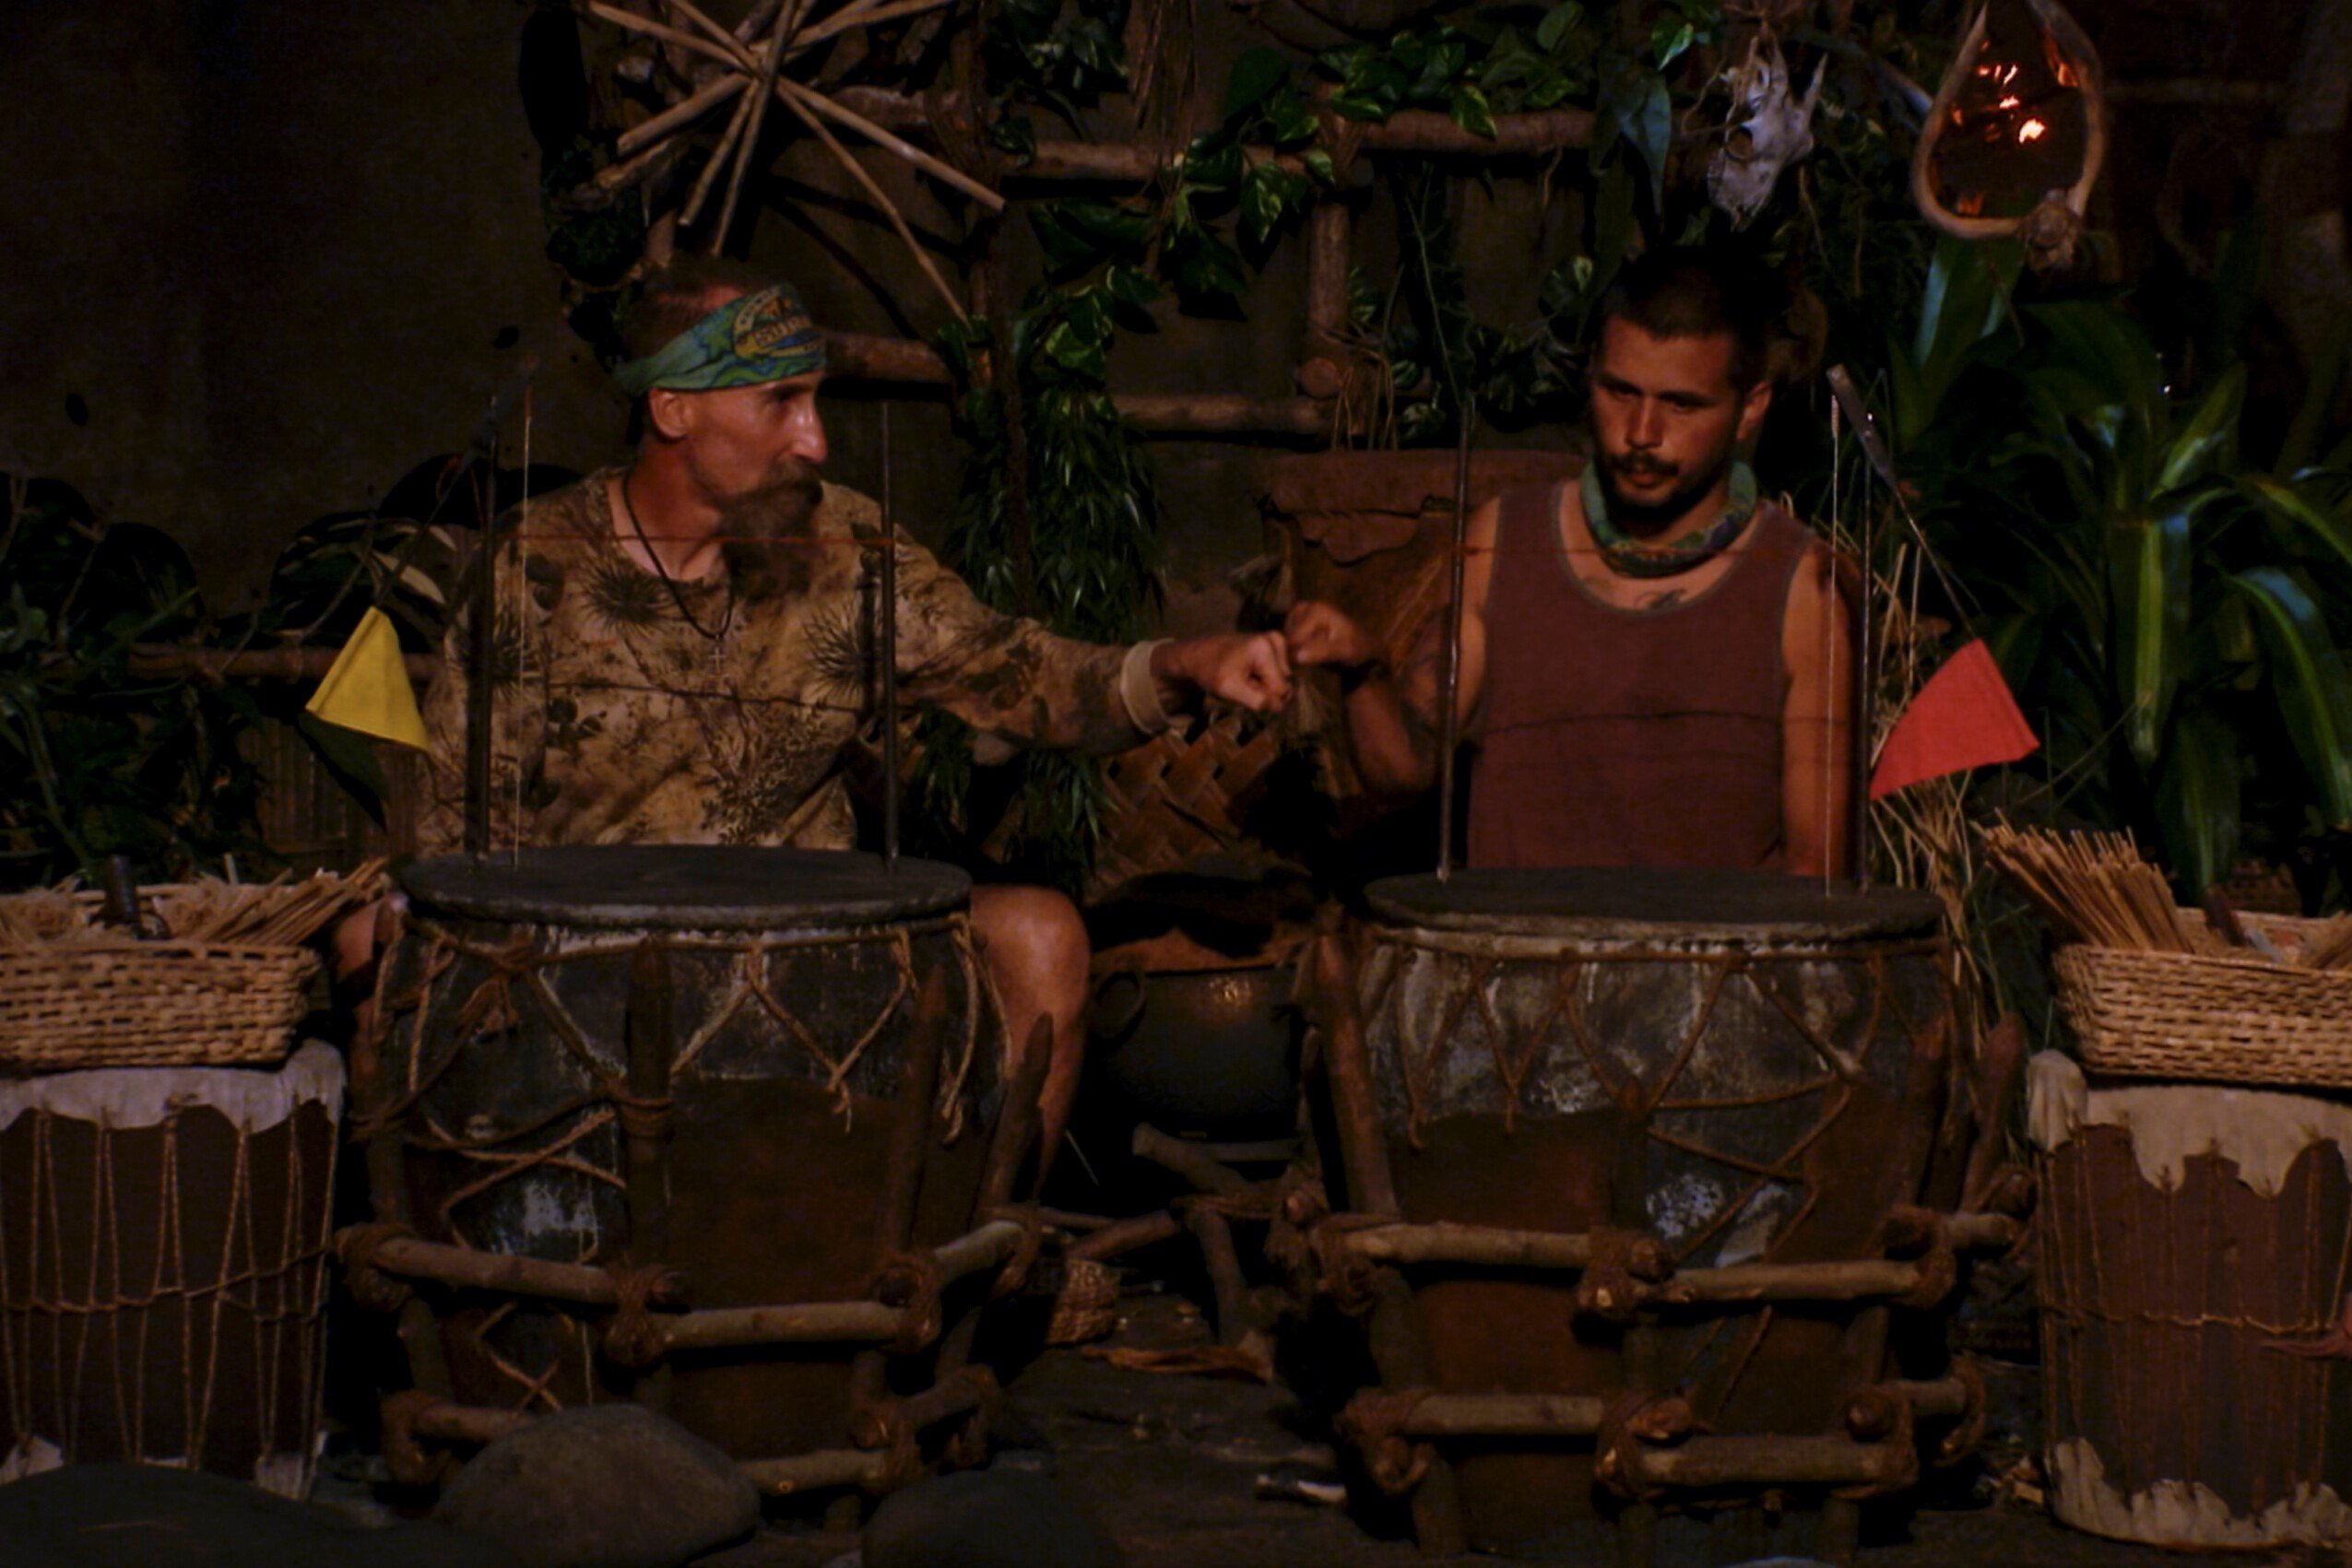 Mike Gabler and Jesse Lopez, who starred in 'Survivor' Season 43 on CBS, compete in the fire-making challenge.